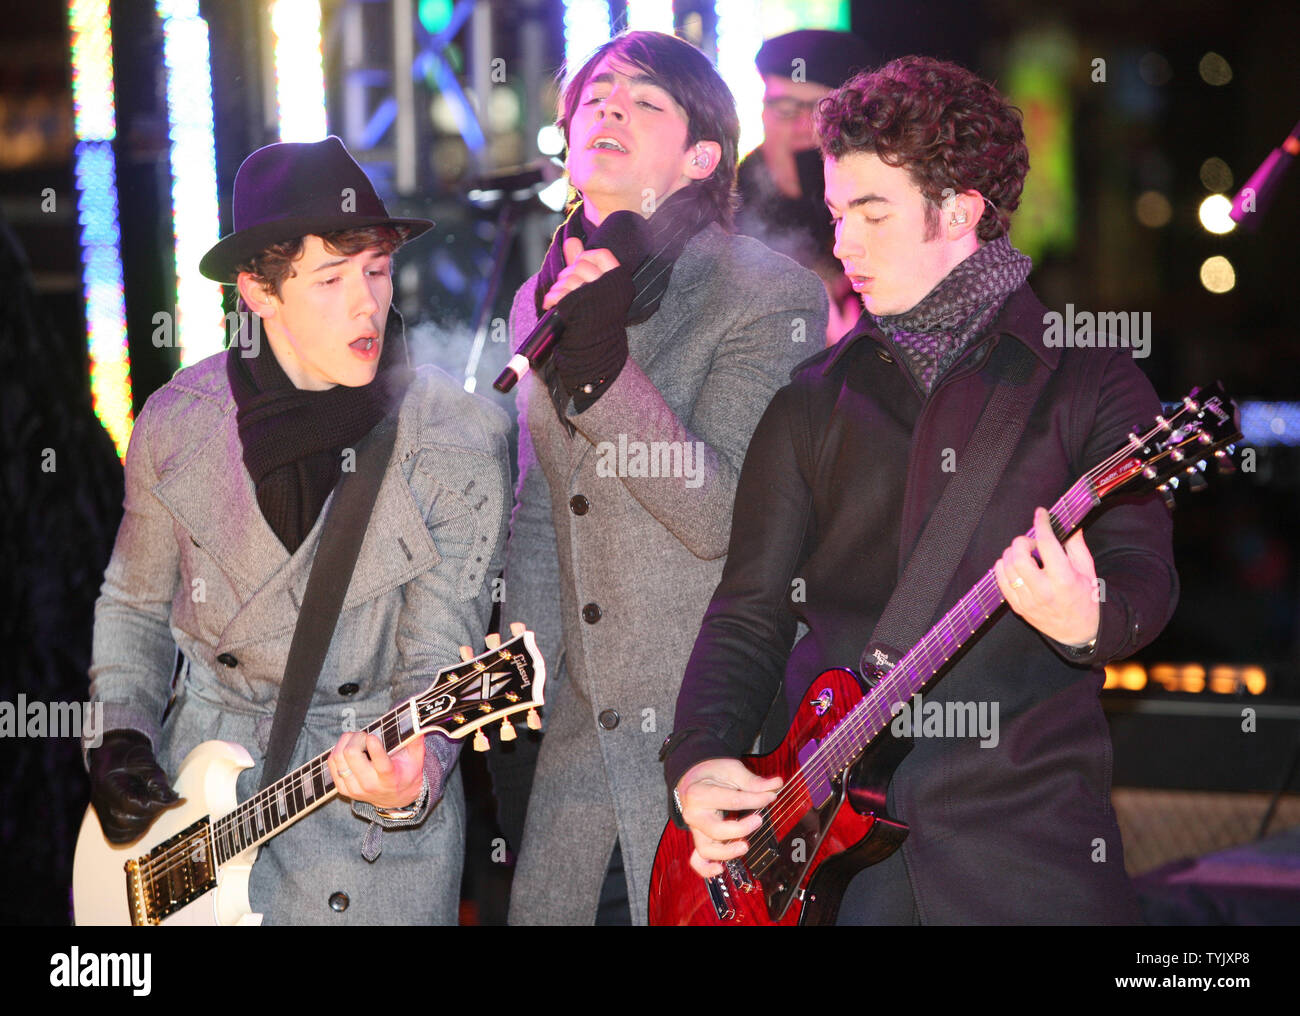 The Jonas Brothers perform in Times Square during the New Year's Eve celebration on December 31, 2008 in New York City. (UPI Photo/Monika Graff) Stock Photo